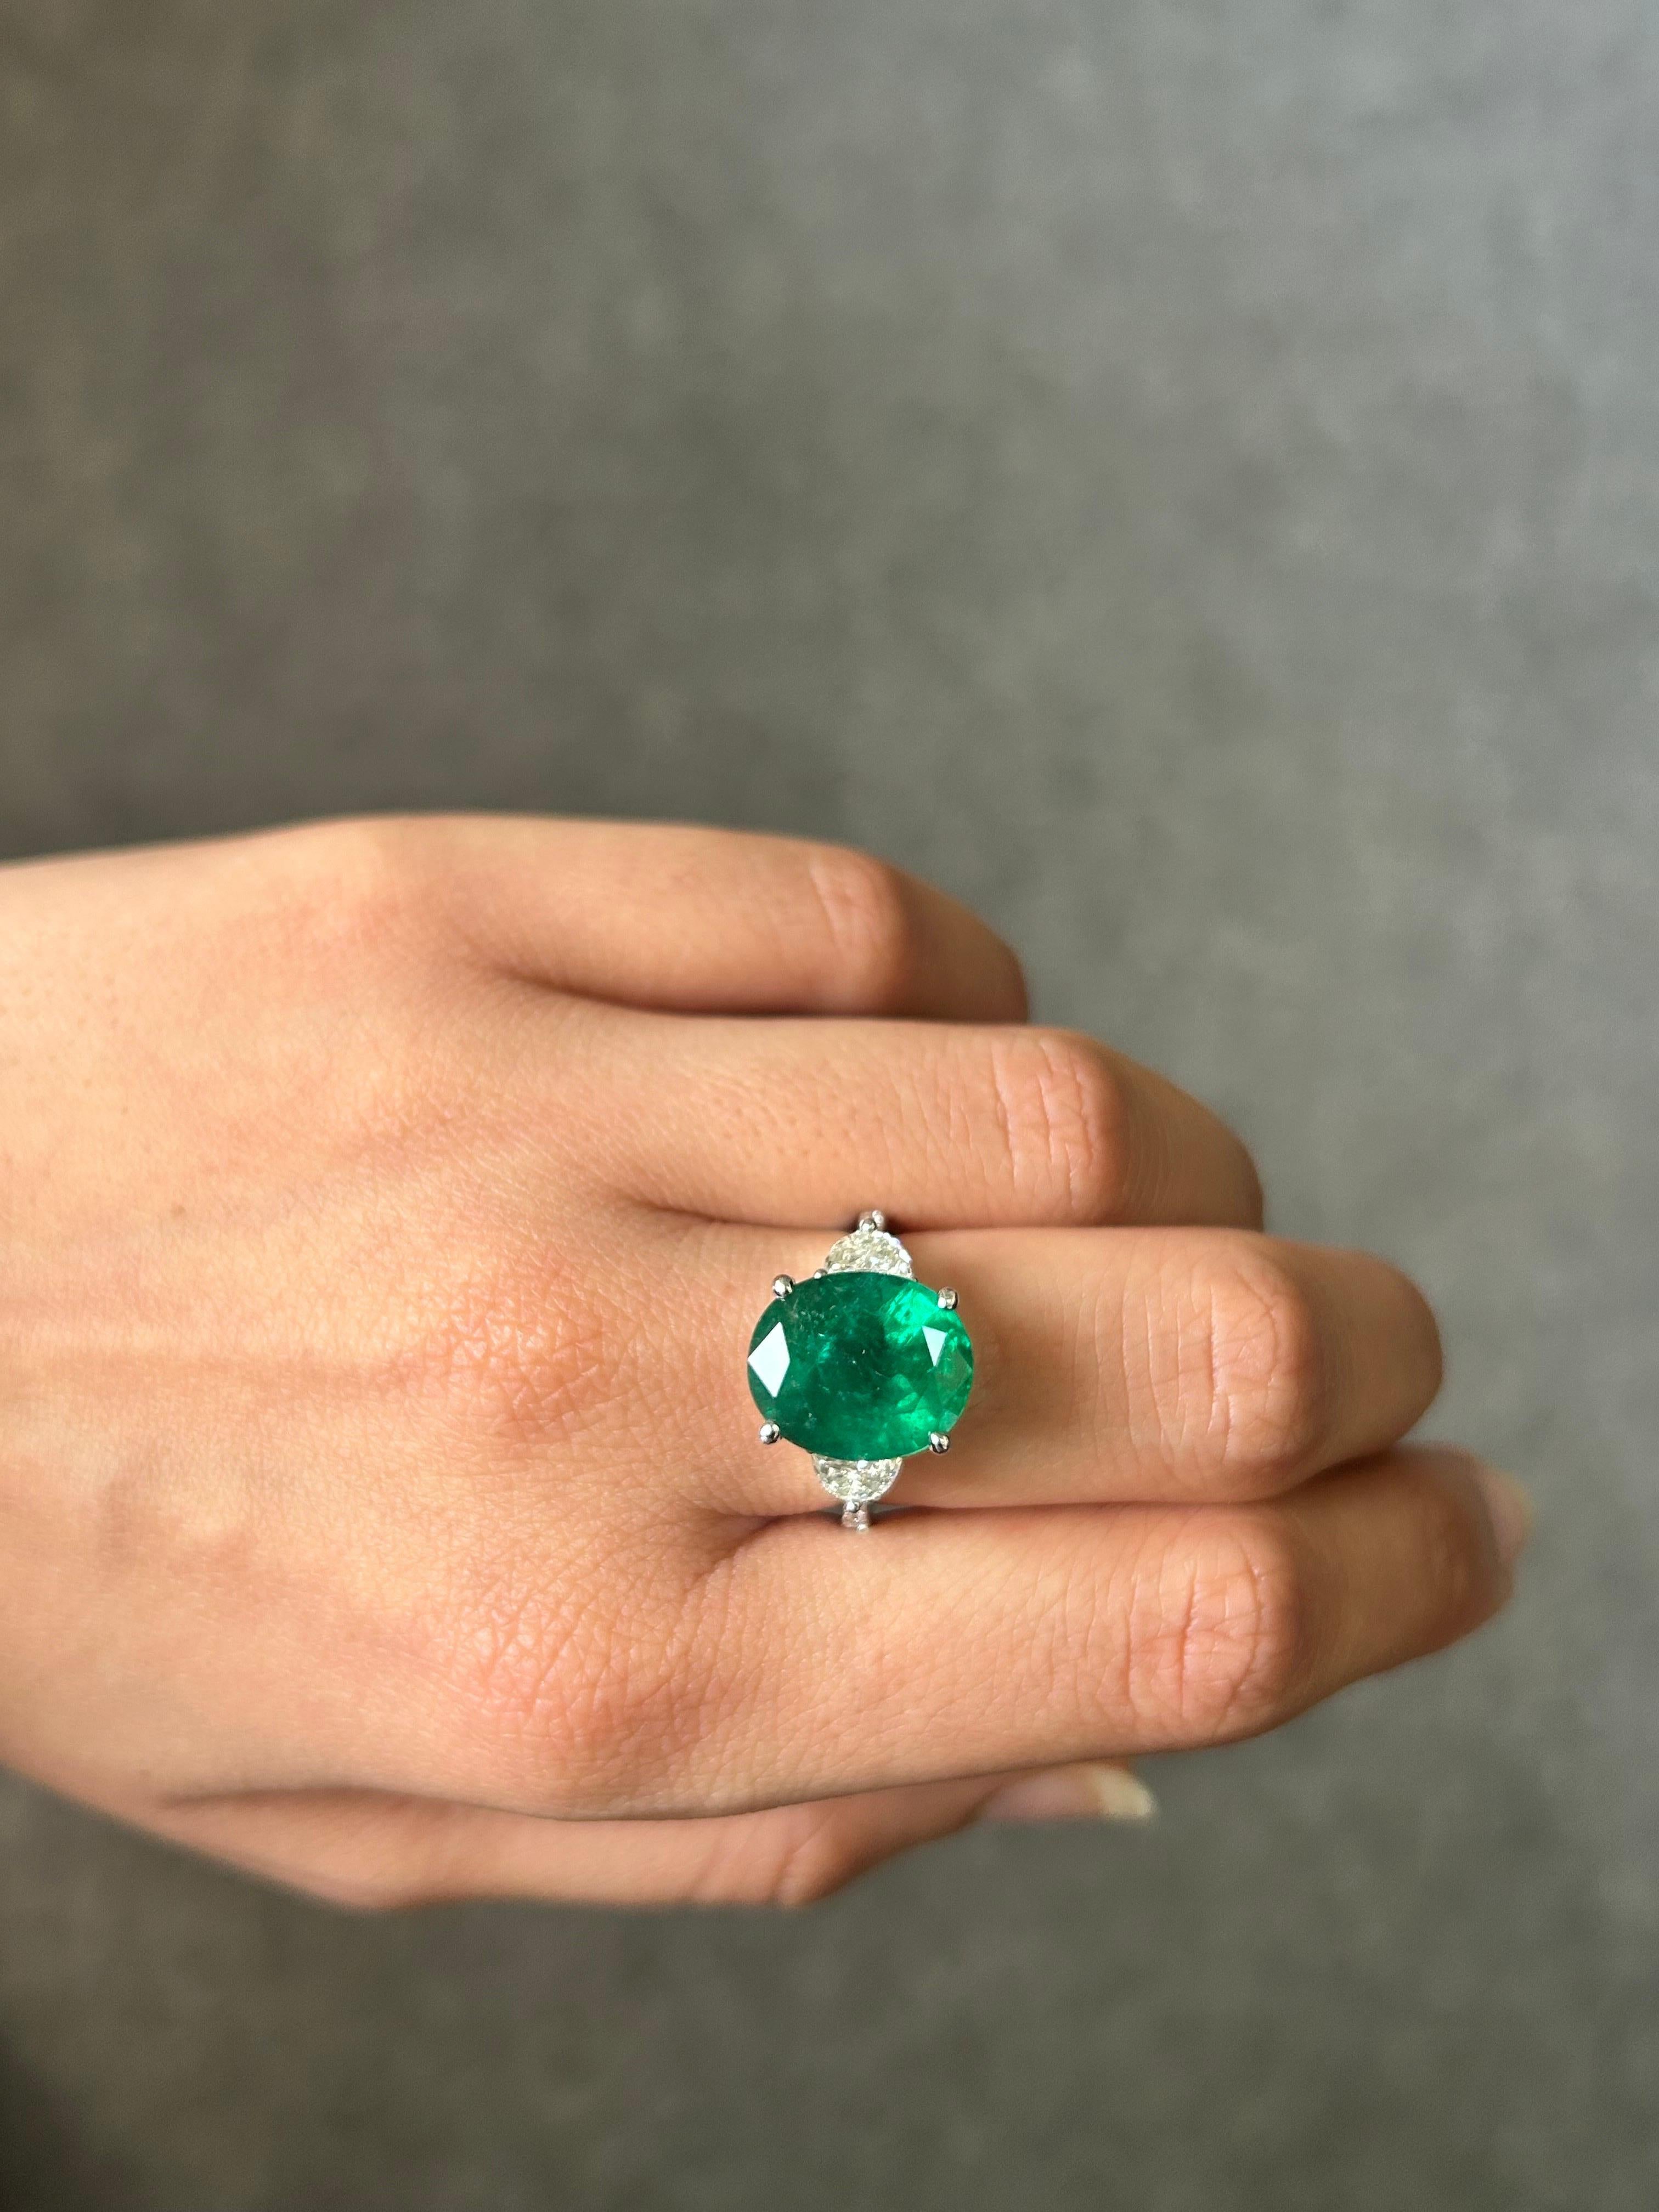 A beautiful 7.12 carat oval shaped natural Zambian Emerald three-stone engagement ring, with 0.62 carat half-moon diamonds and 0.13 carat round diamonds on the band. The center stone is of top quality, with a stunning vivid green color and is